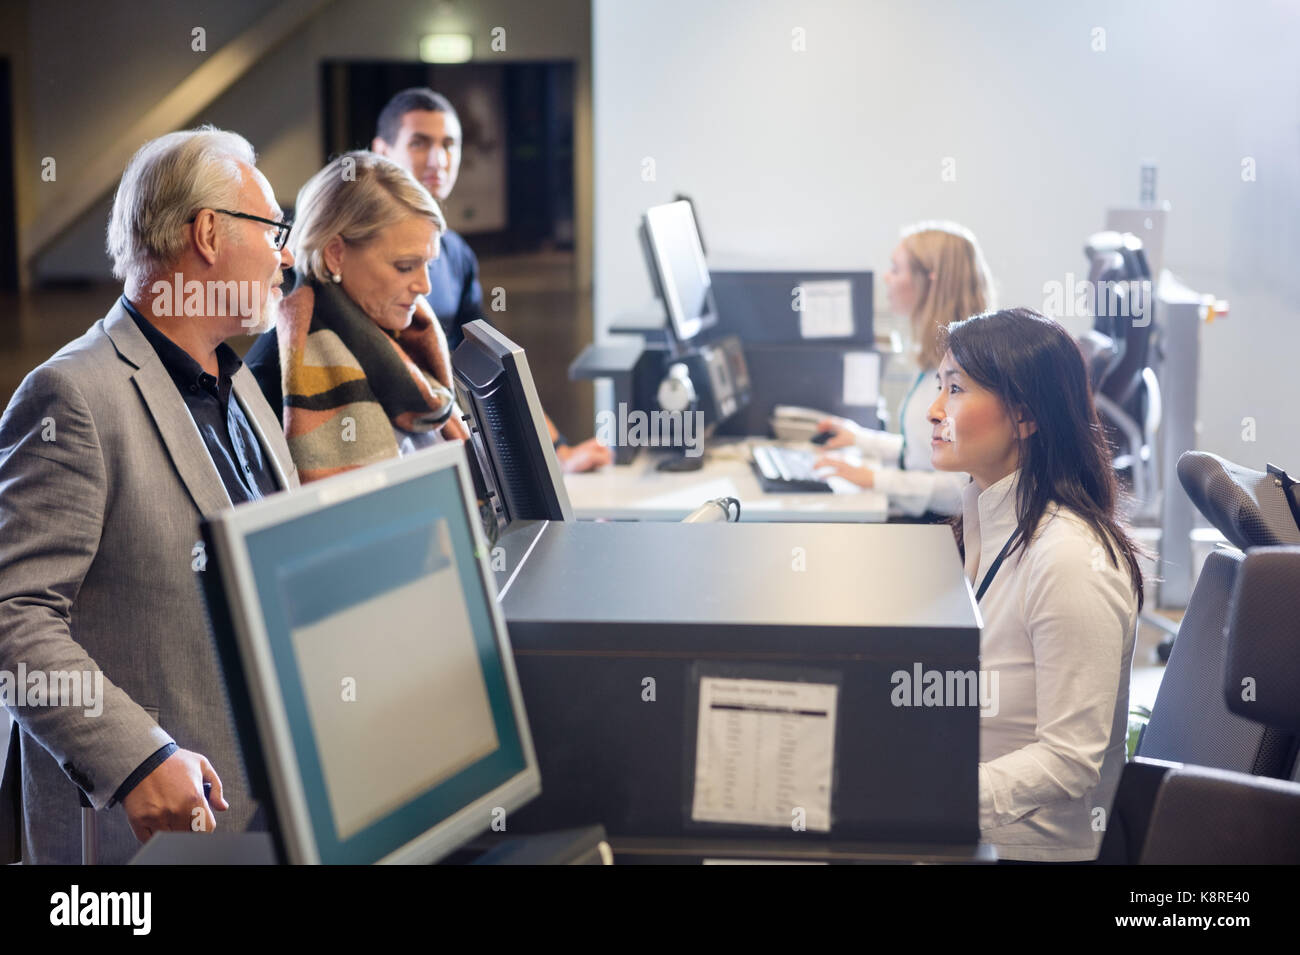 Staff Looking At Senior Business Couple At Airport Check-in Desk Stock Photo